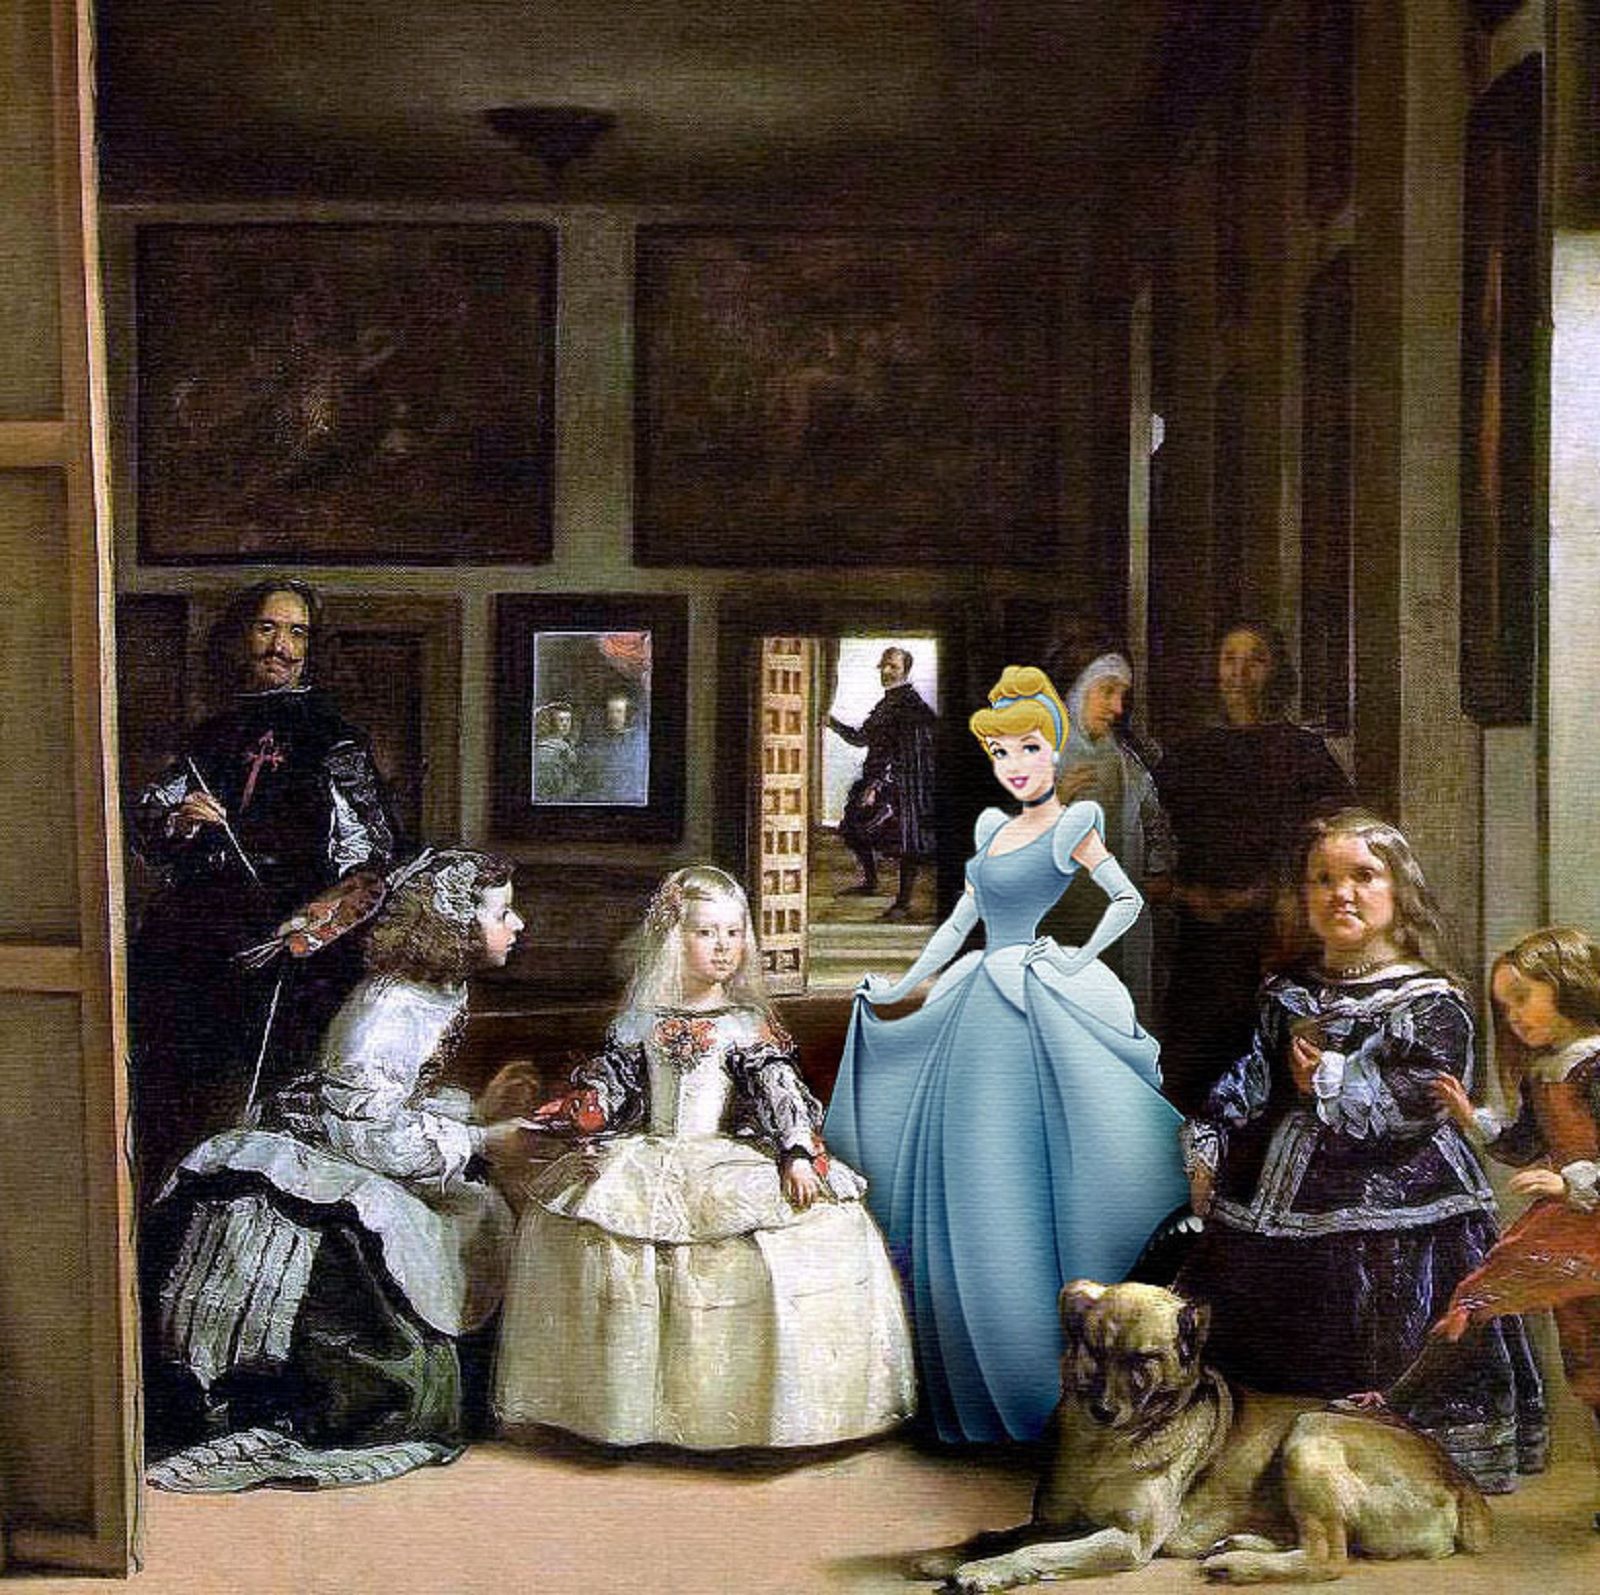 Amusing Images Of Cartoon Characters In Photoshopped Into Renaissance Paintings image 9